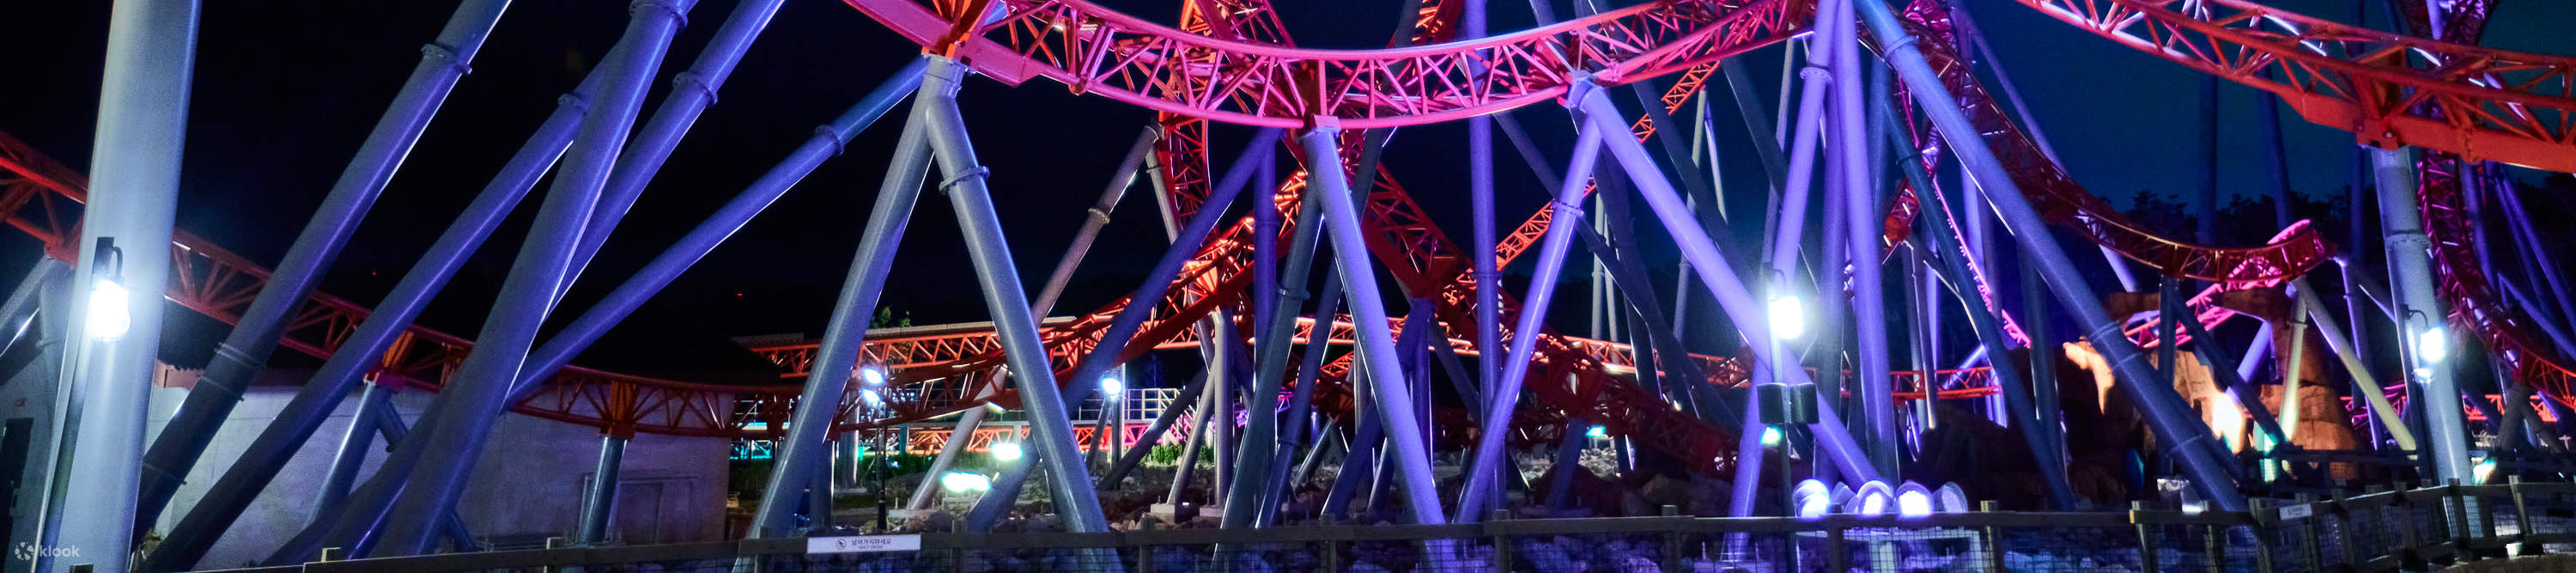 Night view of Roller Coaster